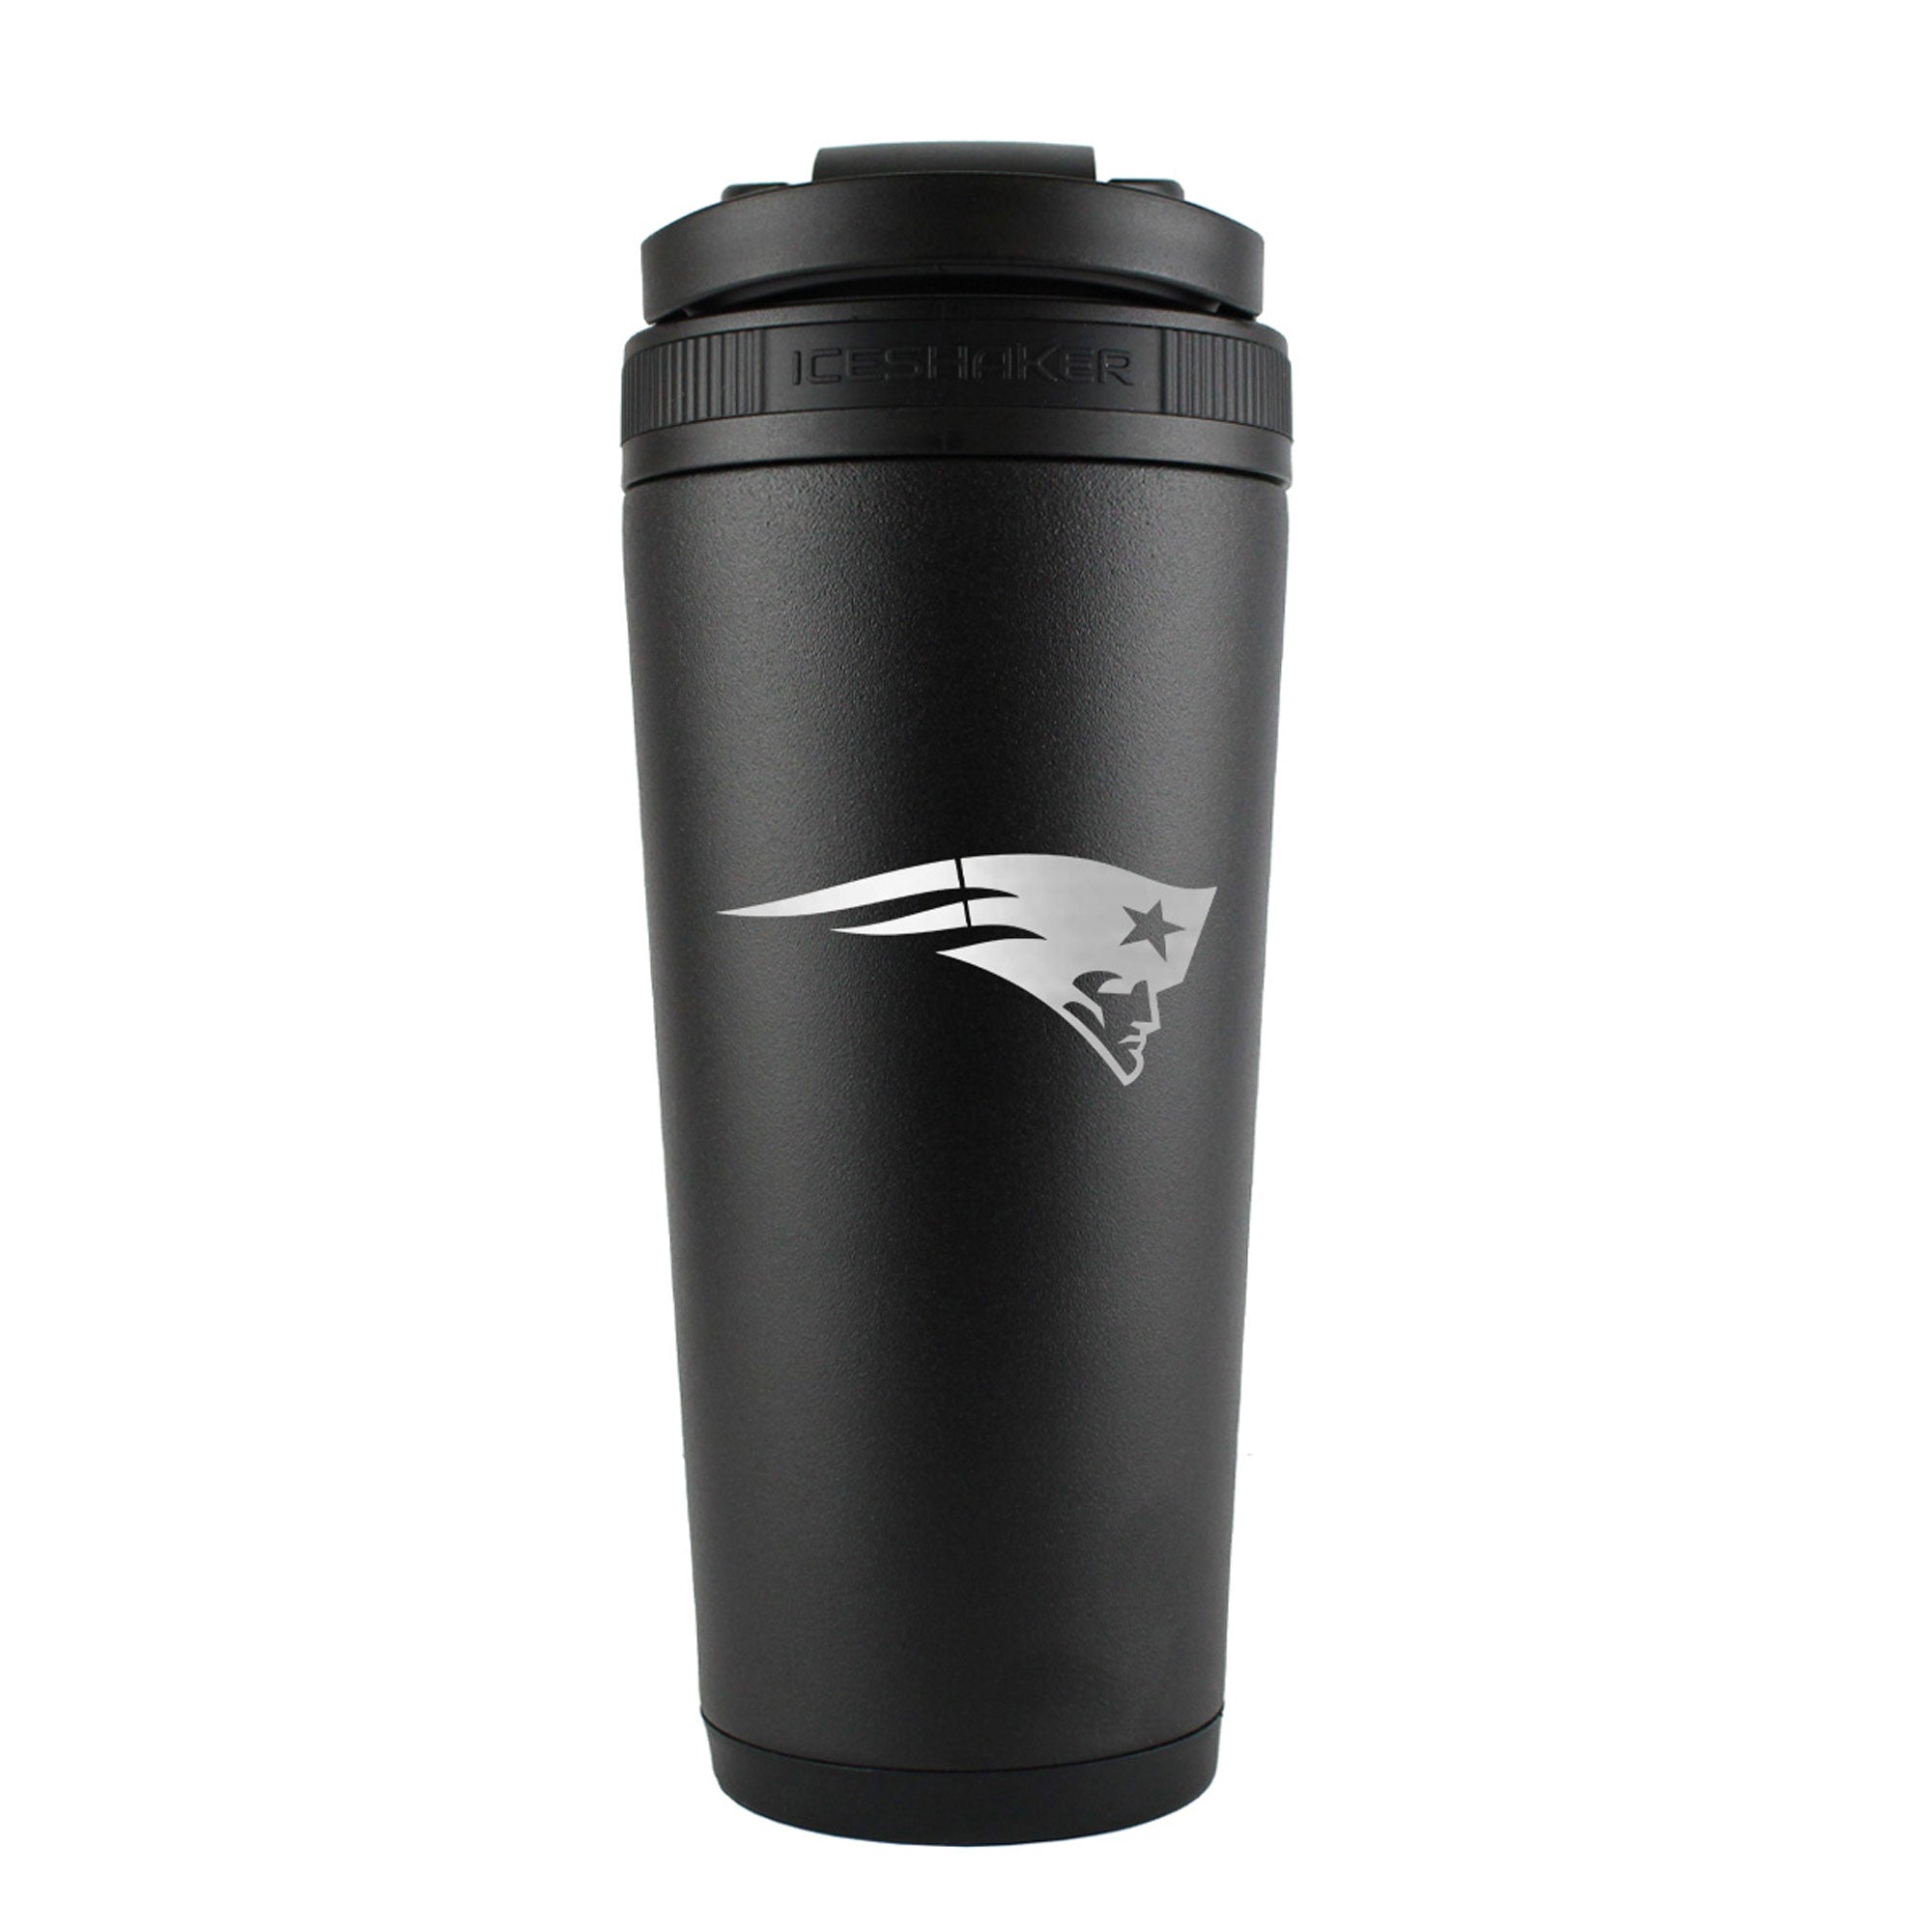 Officially Licensed New England Patriots 26oz Ice Shaker - Black